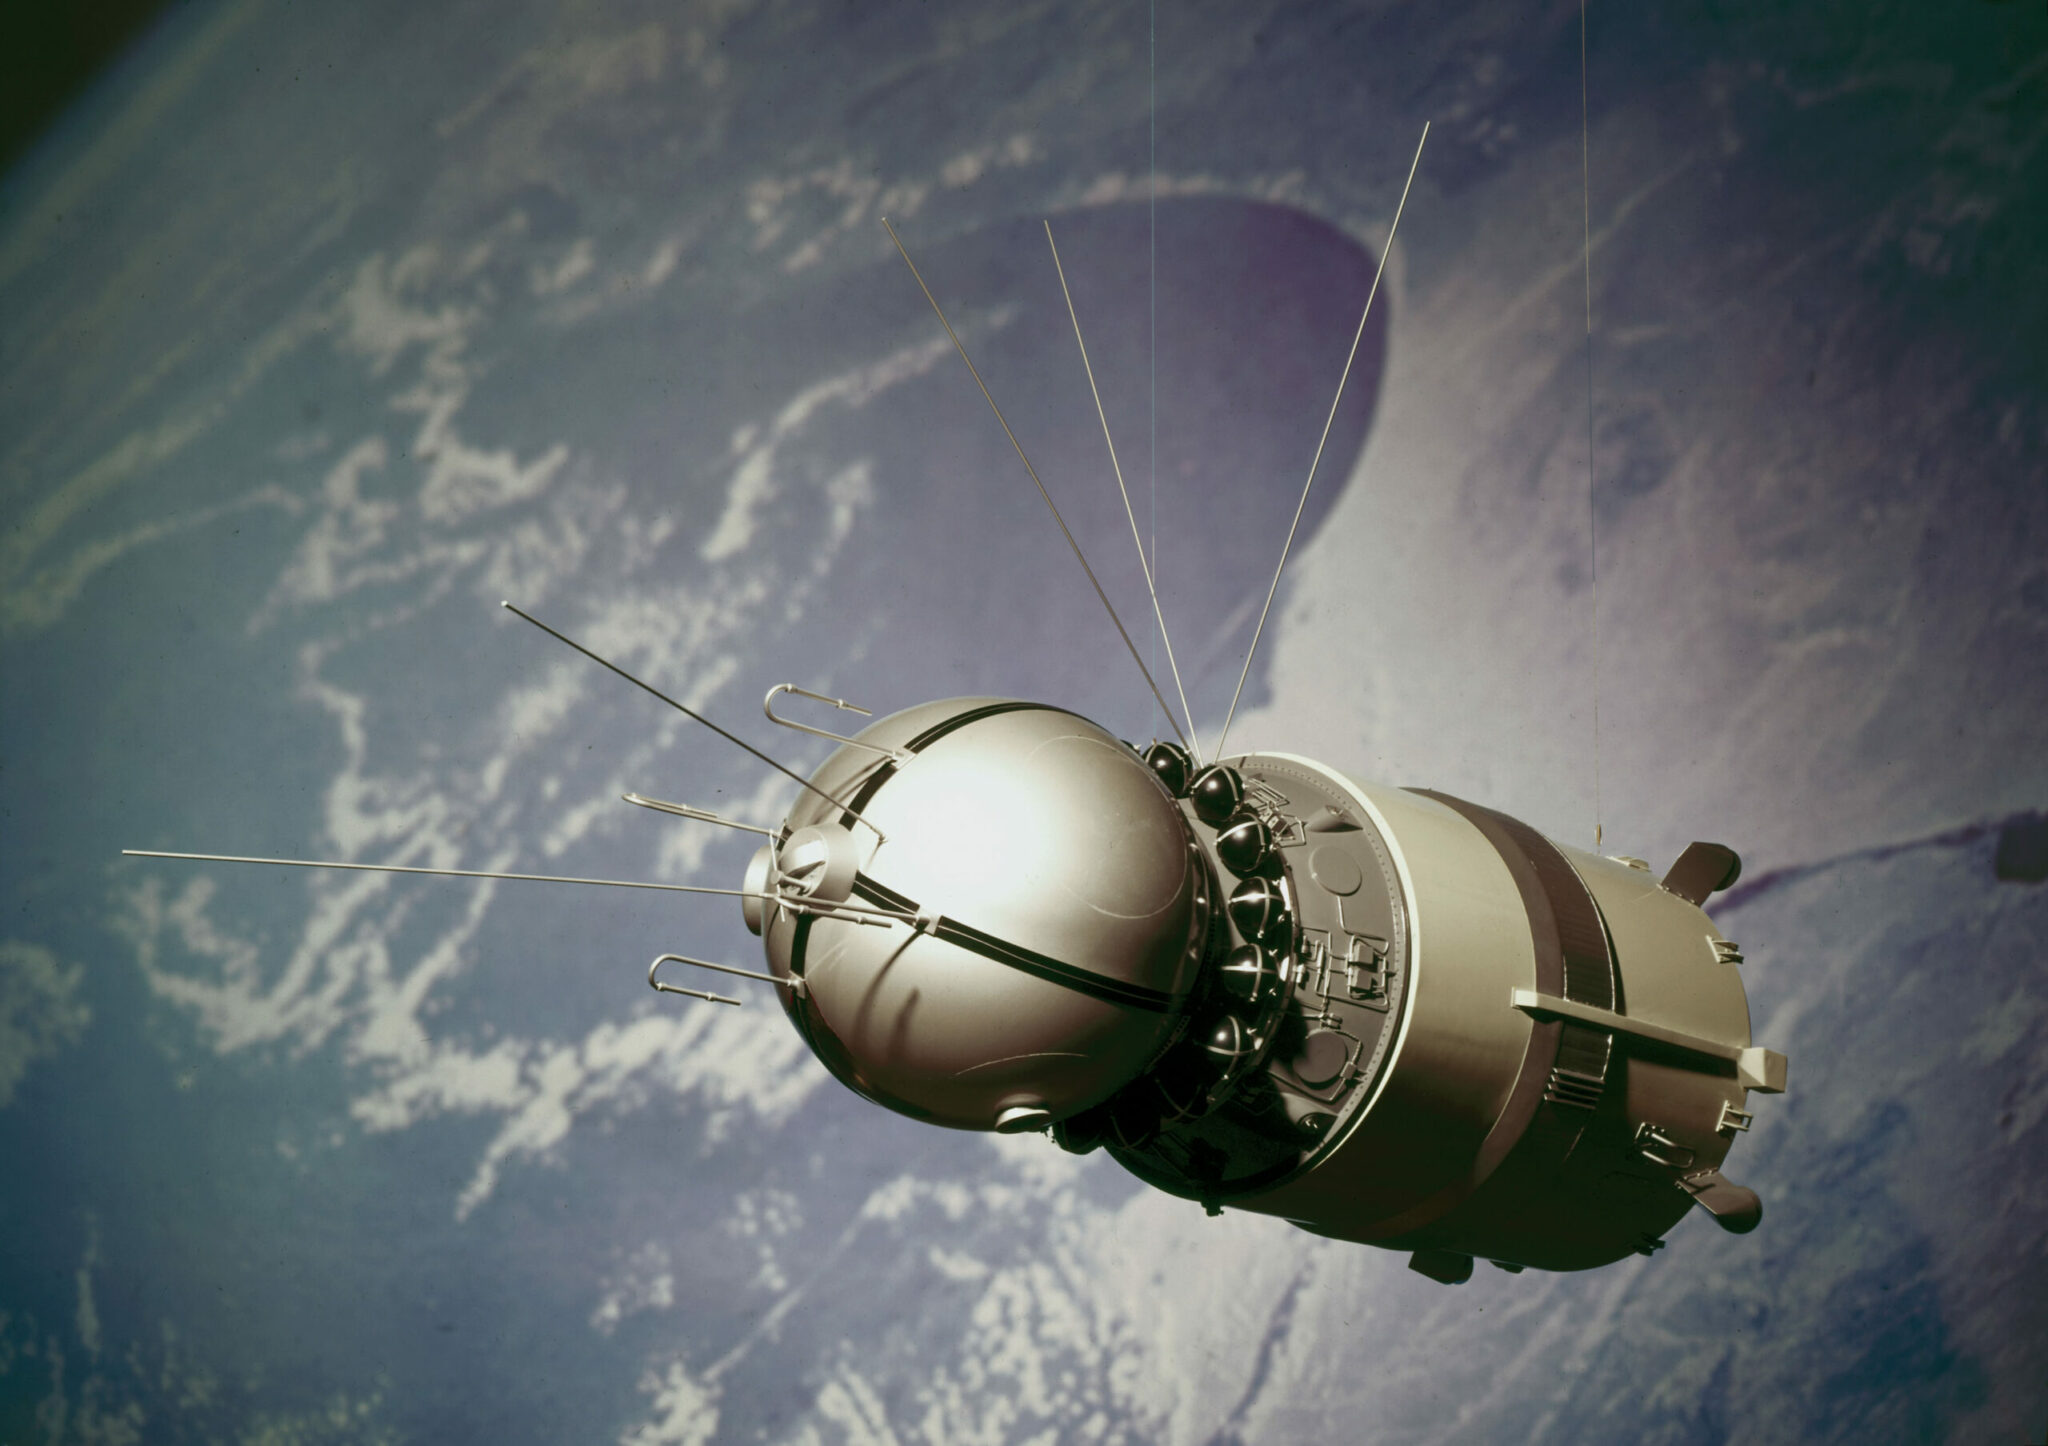 what was the first space station in the world and how long did the soviet salyut 1 spend in earth orbit scaled